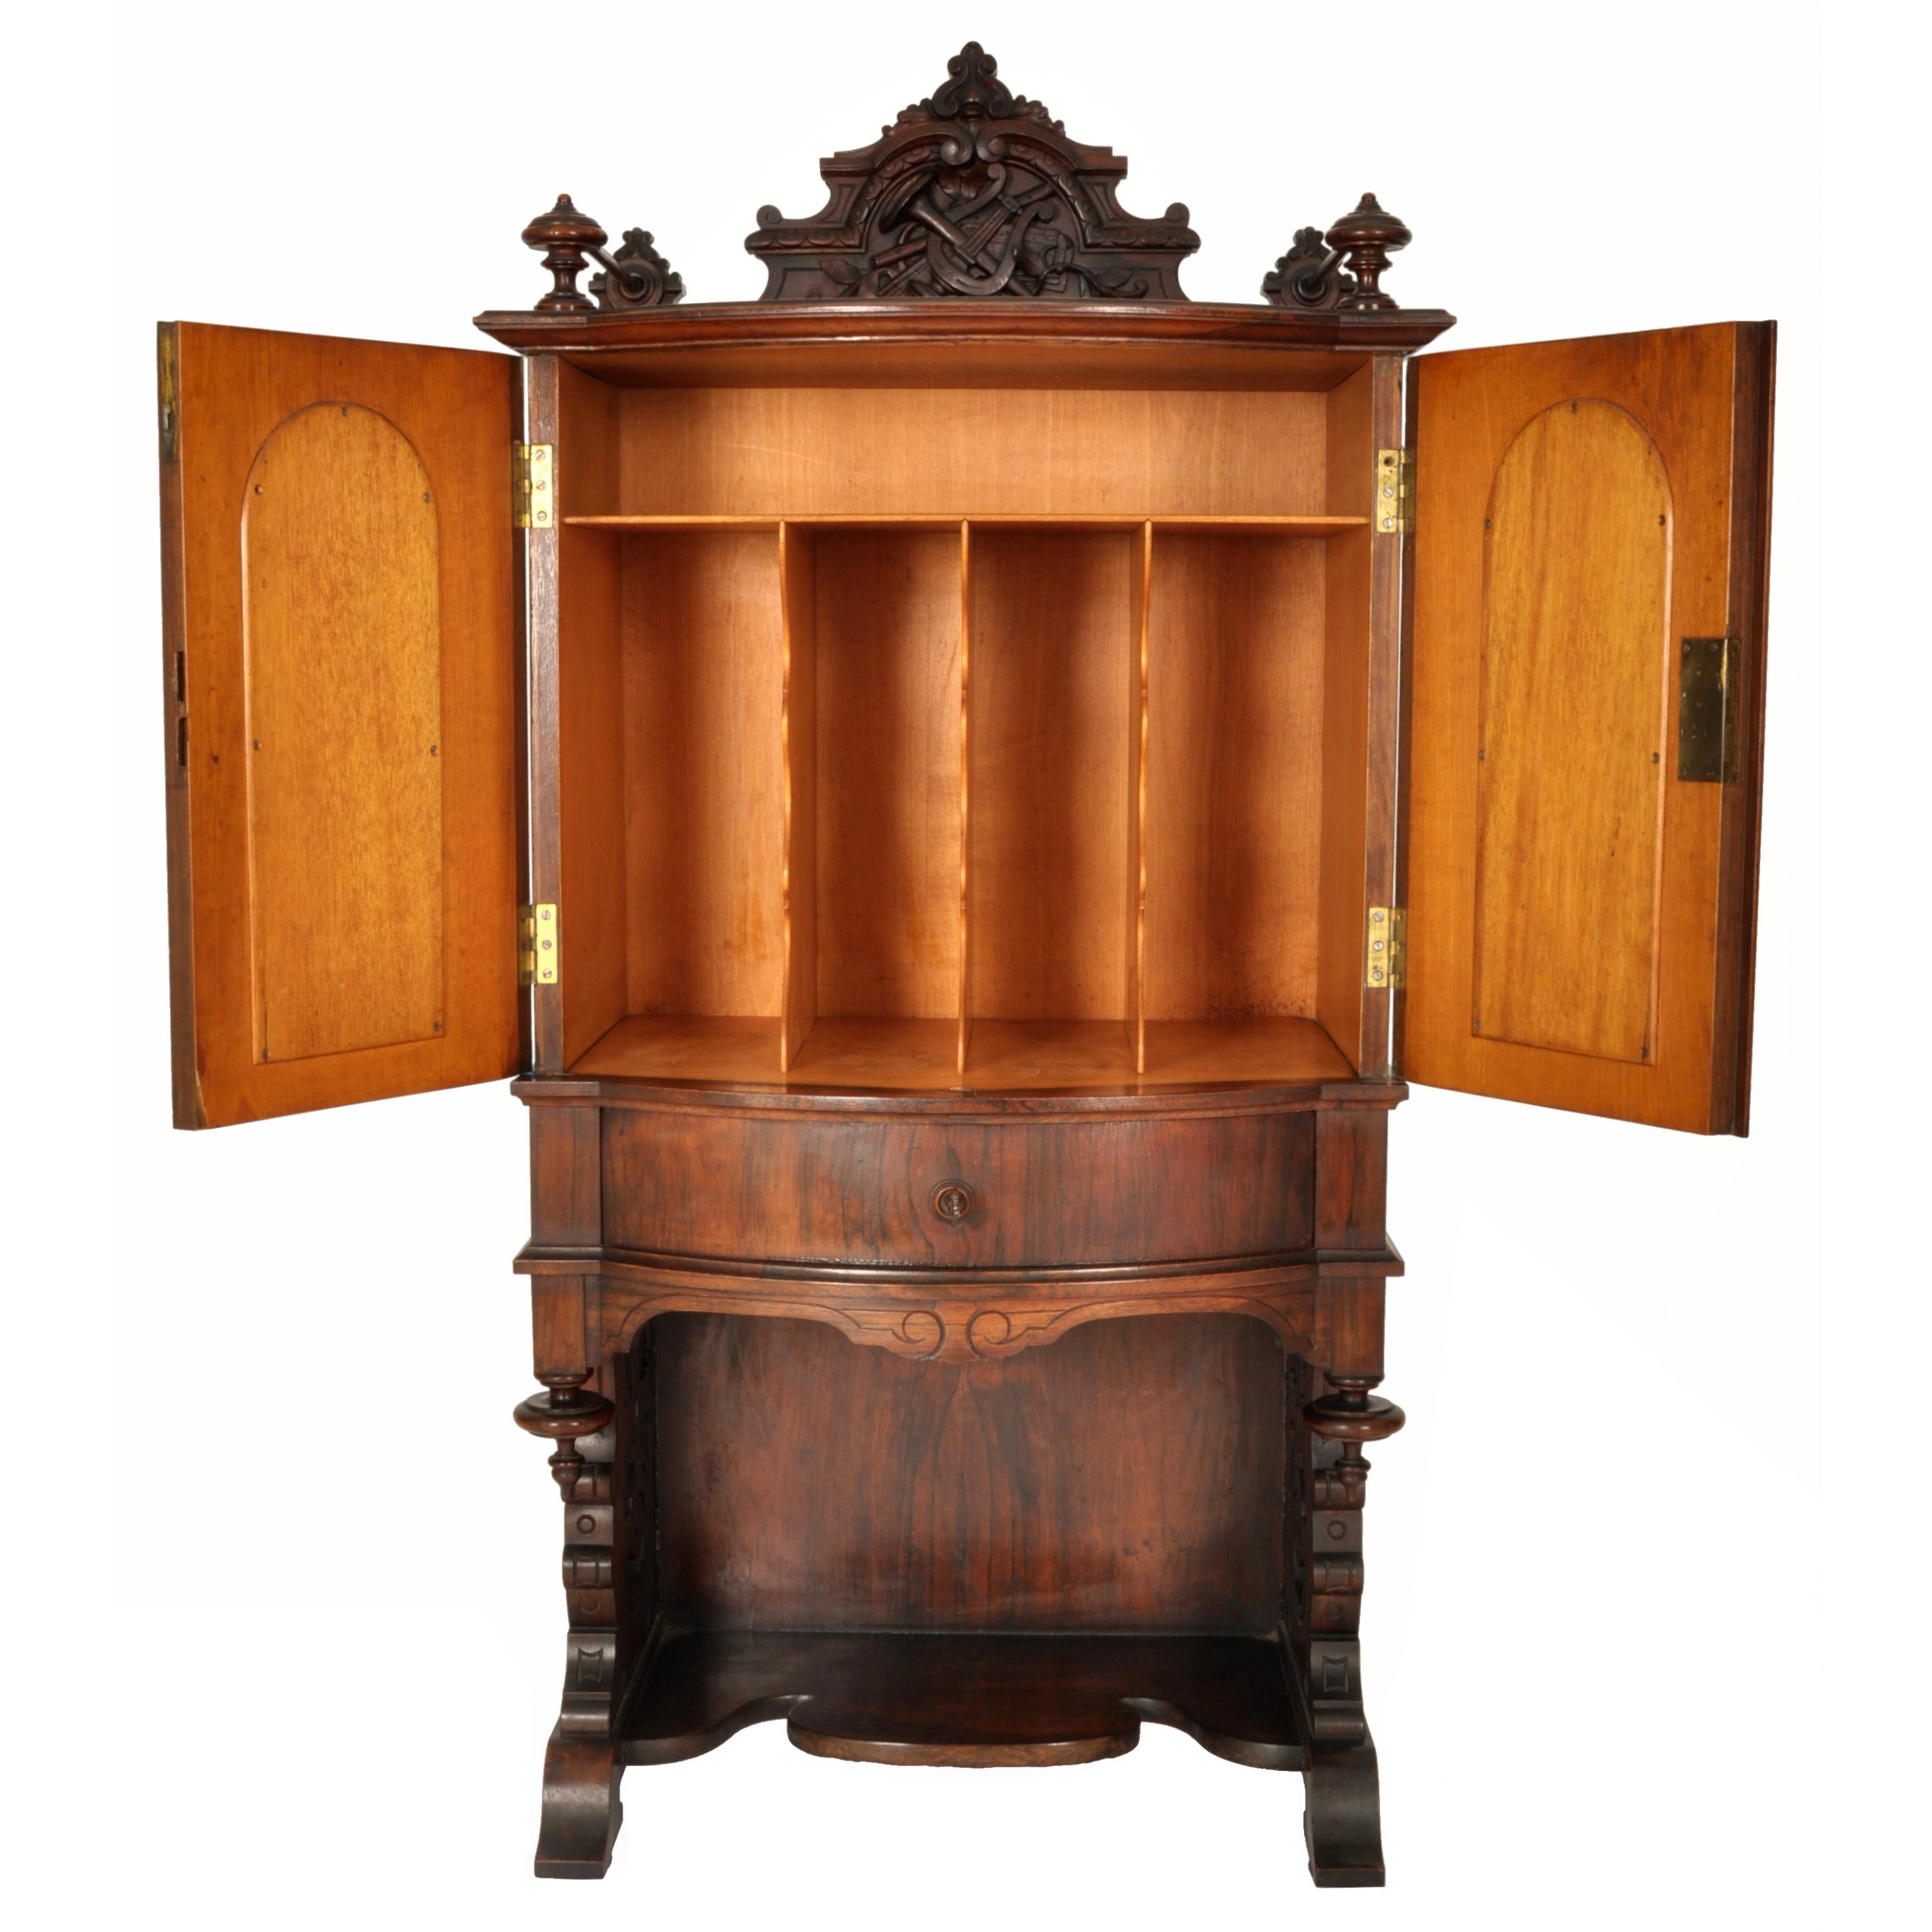 Maple Antique American Renaissance Revival Rosewood Carved Music Cabinet, Circa 1870